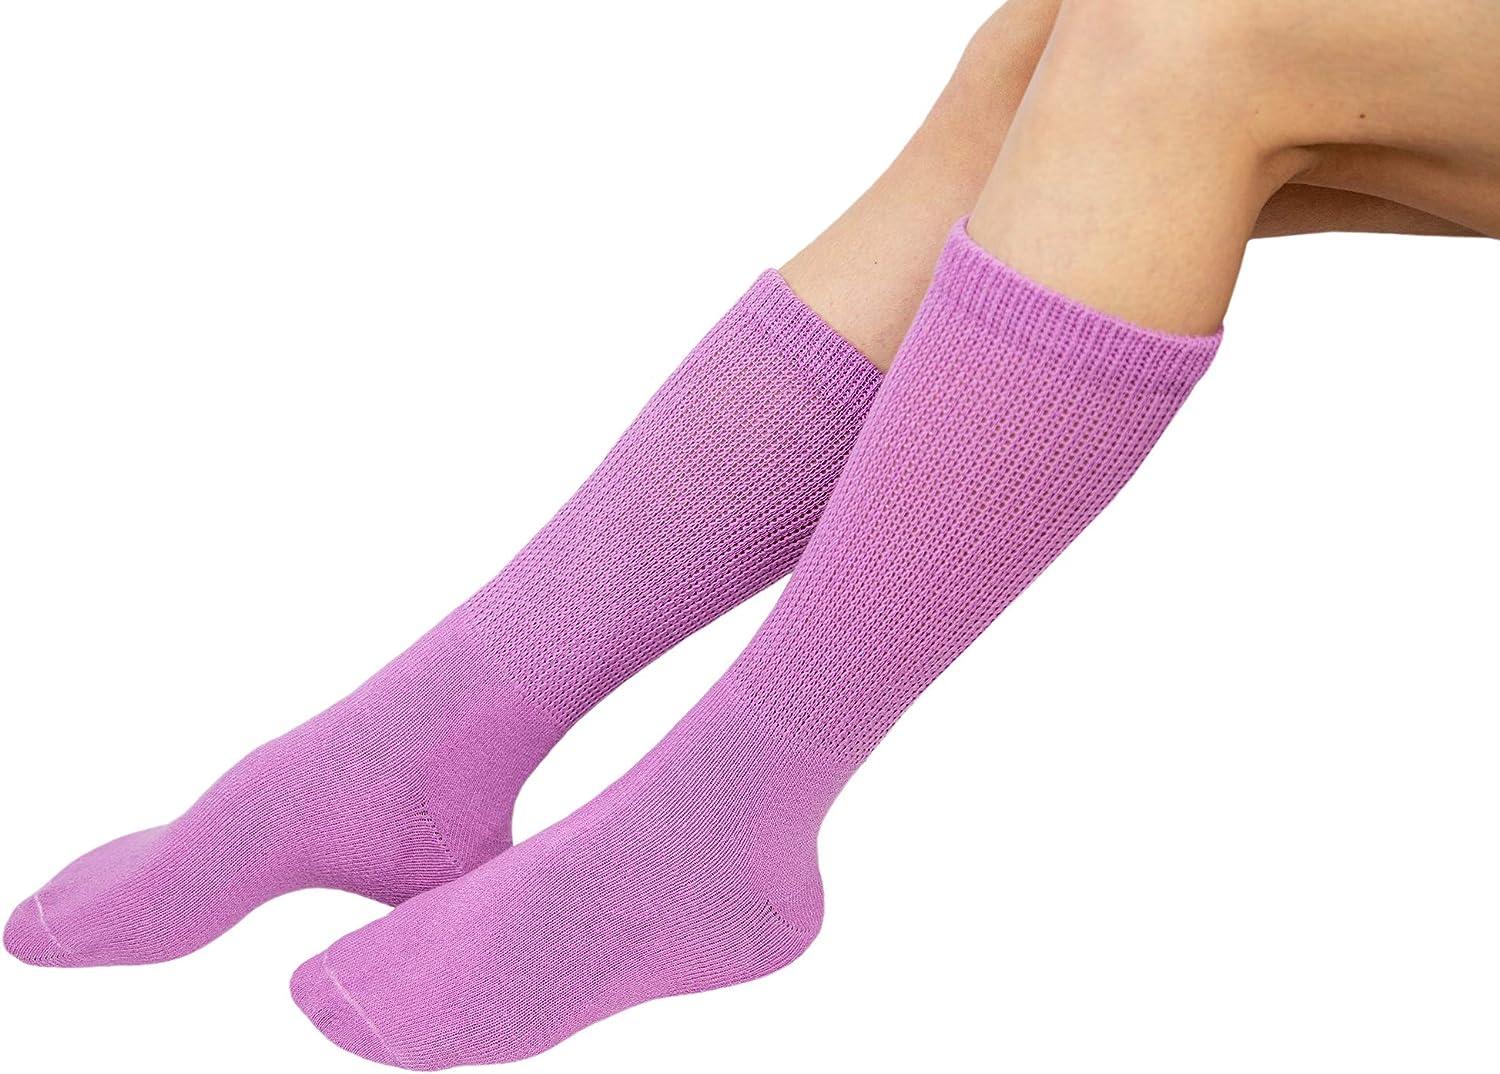 6 Pairs of Non-Skid Over-The-Calf Diabetic Cotton Socks with Non